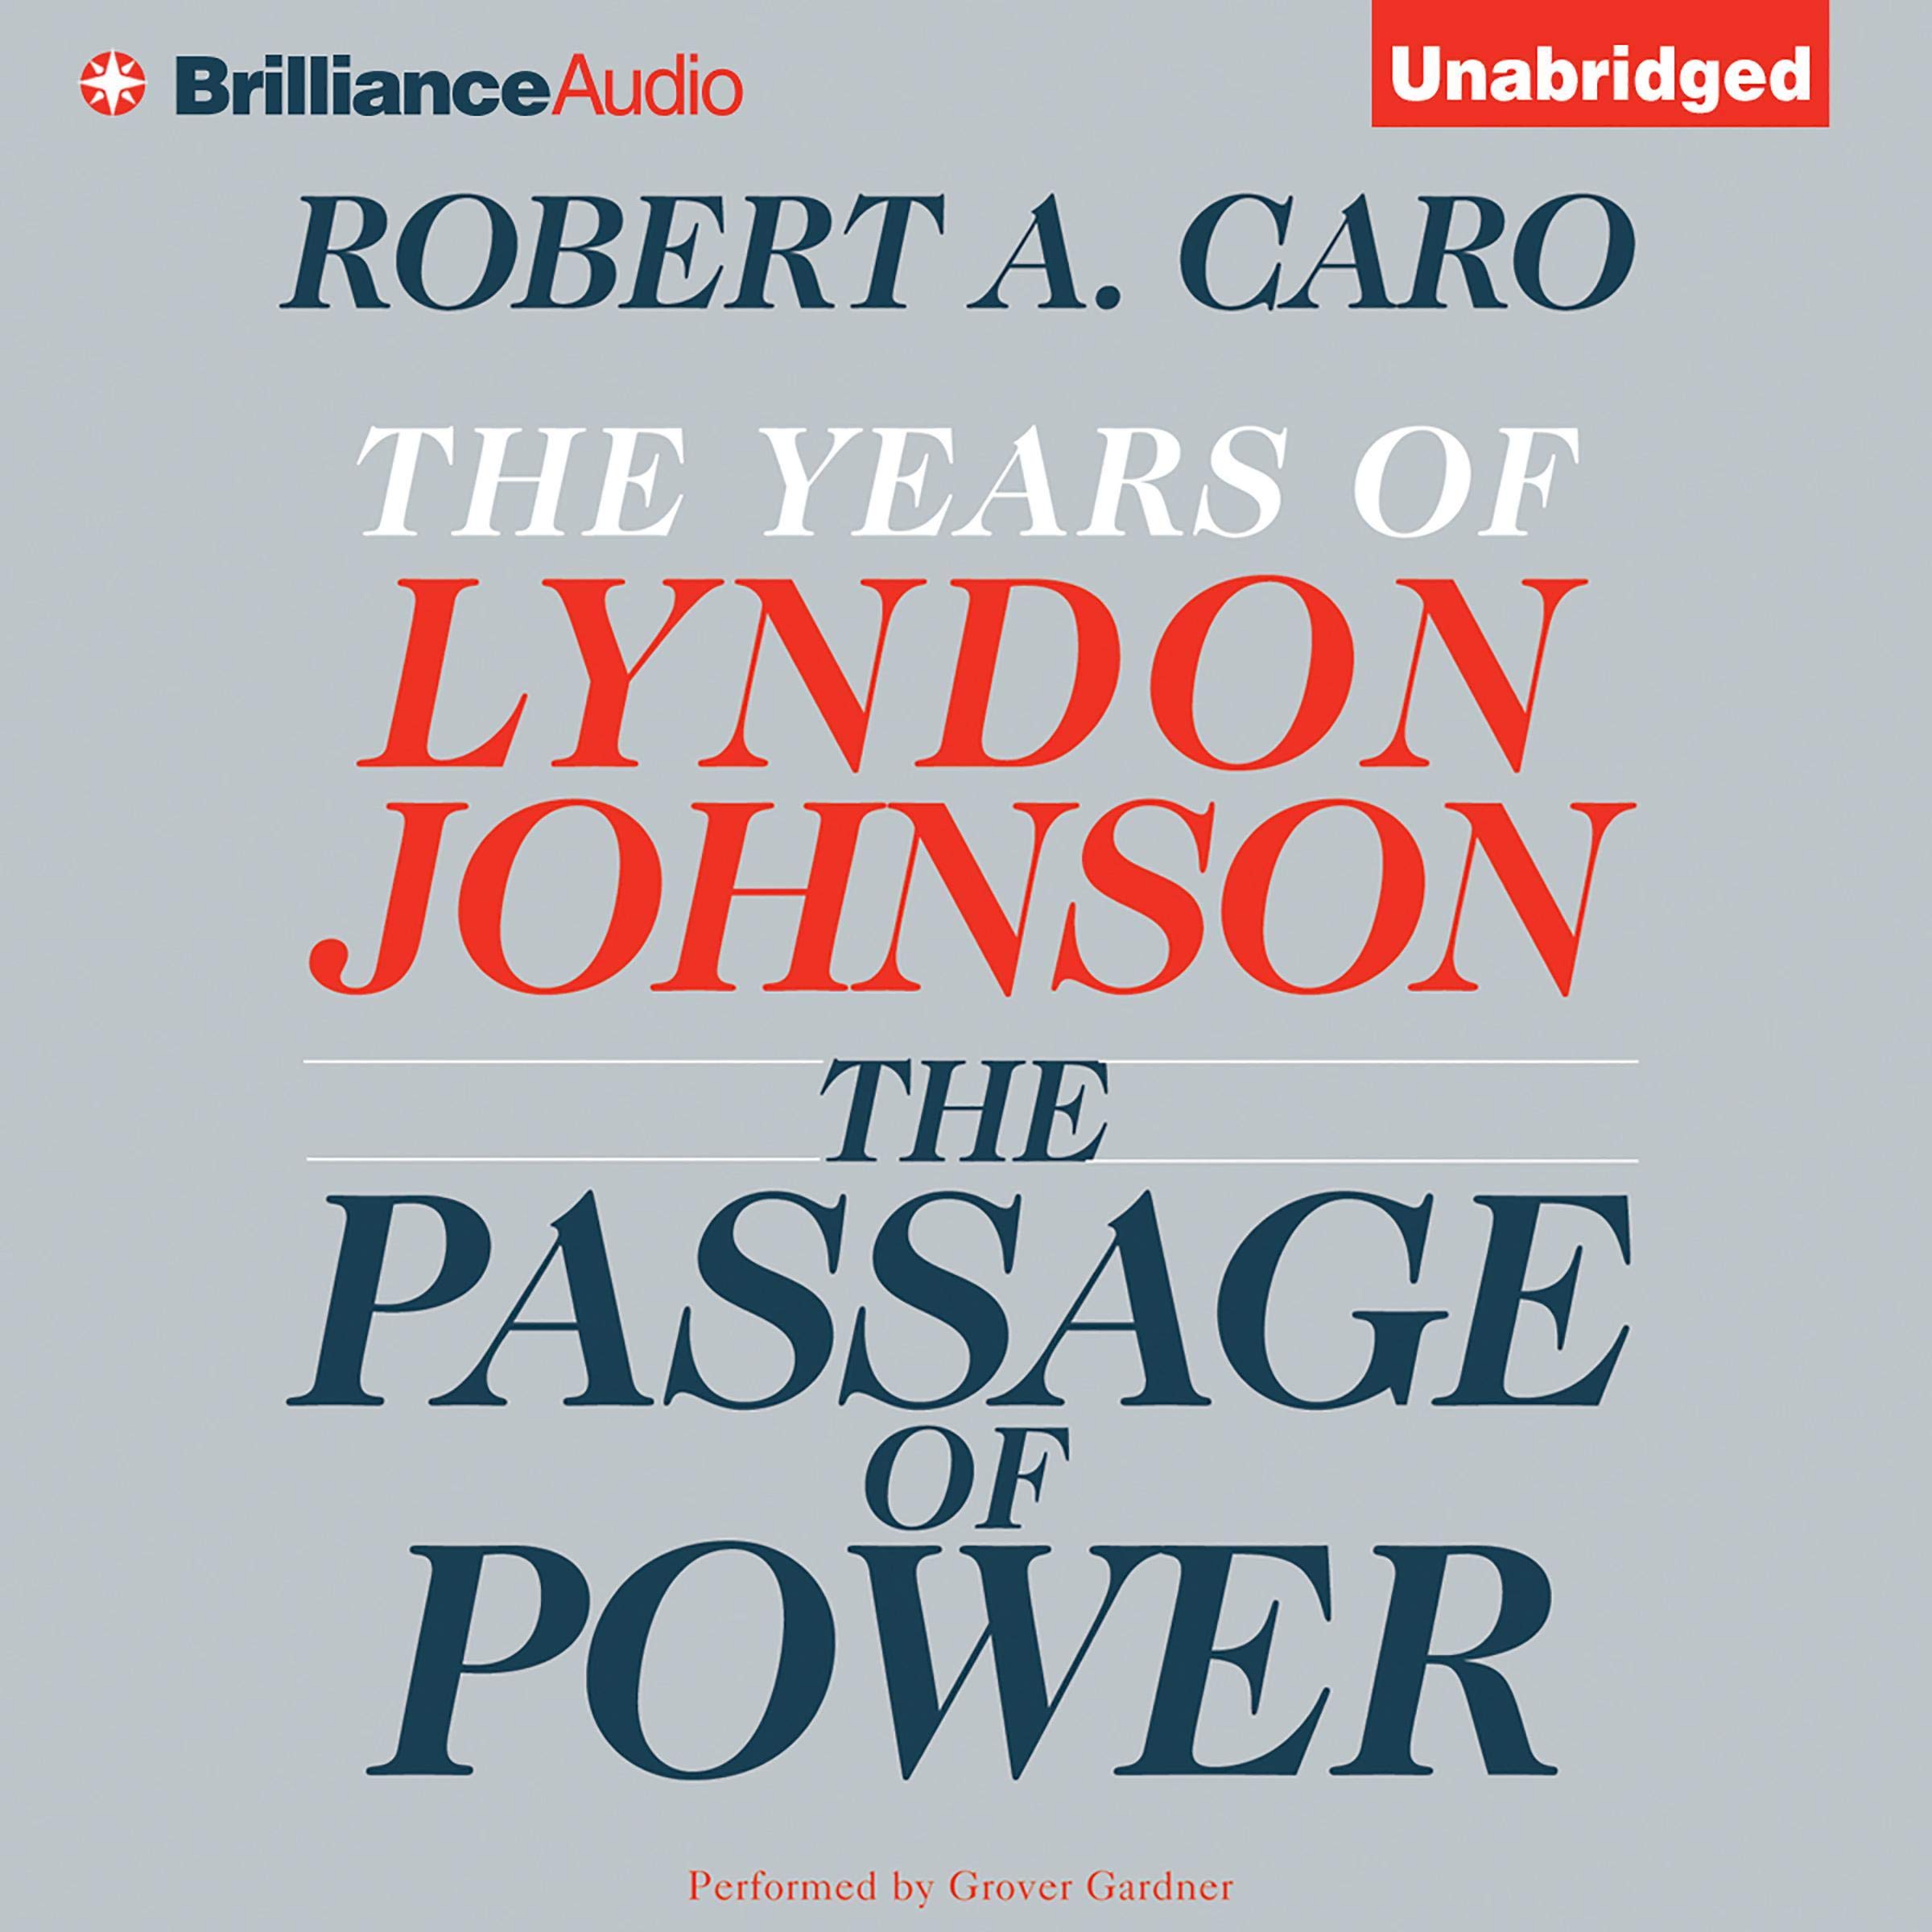 The Passage of Power: The Years of Lyndon Johnson, Book 4